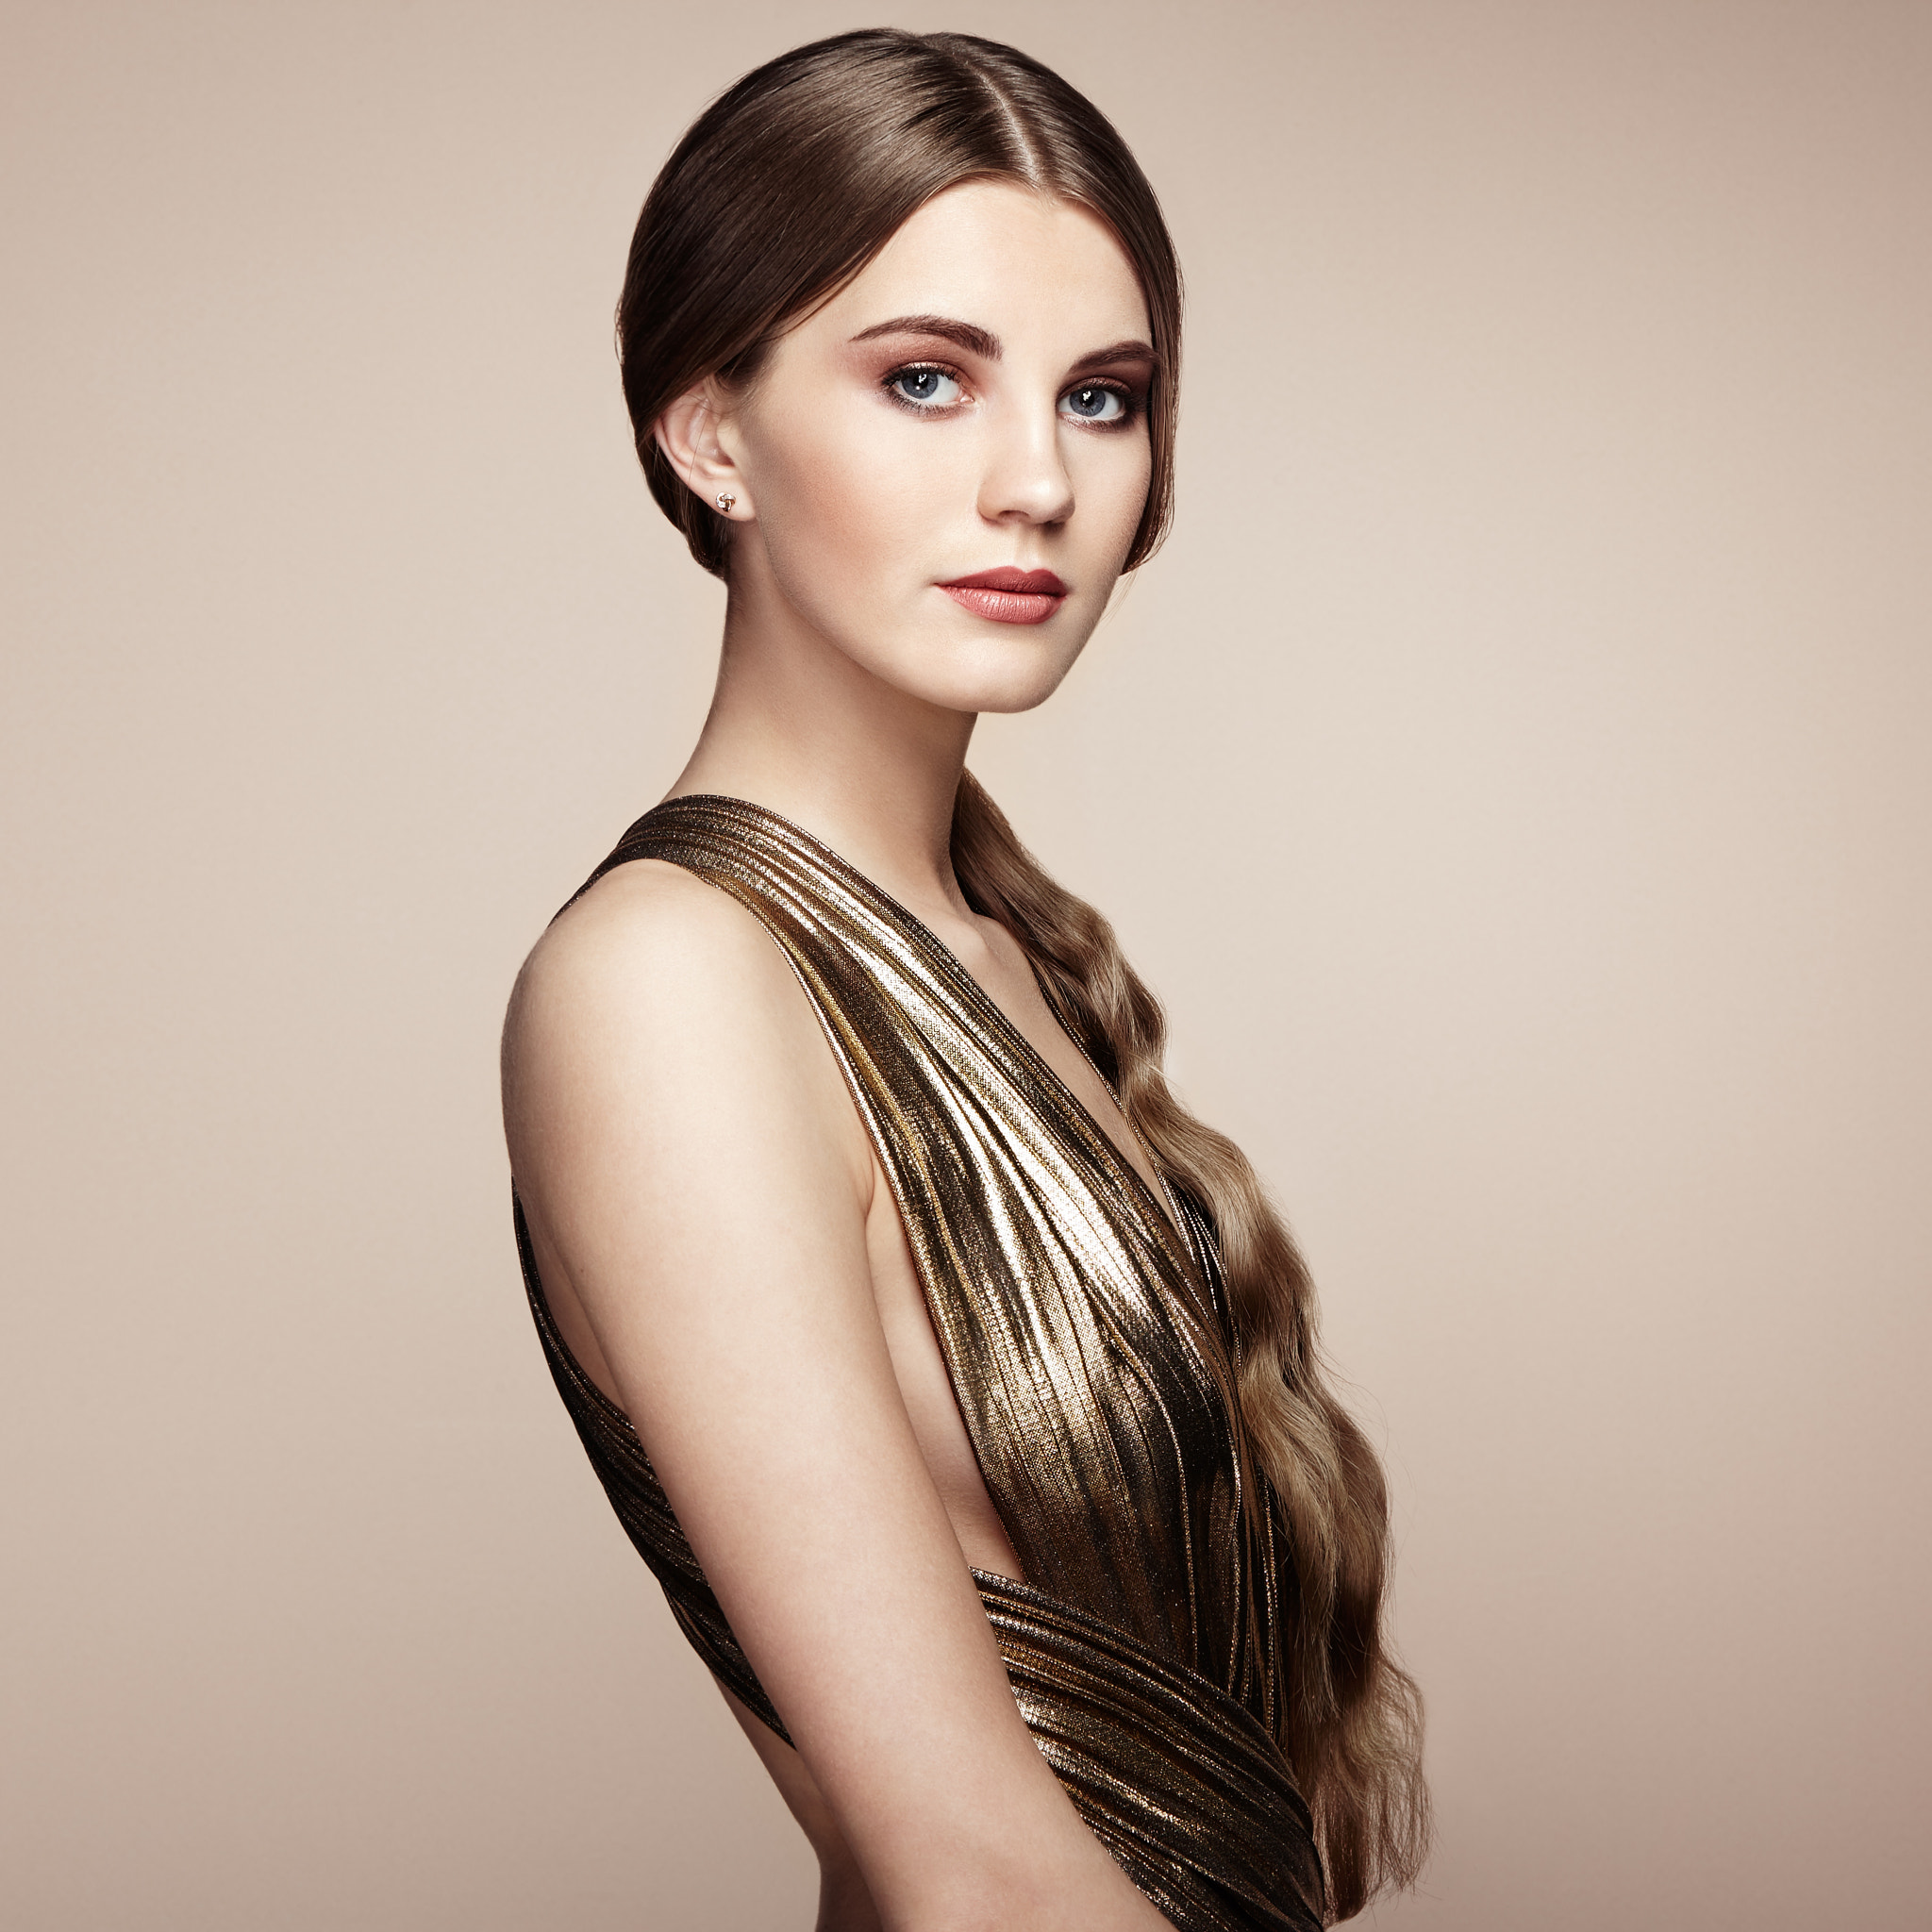 Fashion portrait of young beautiful woman in gold dress